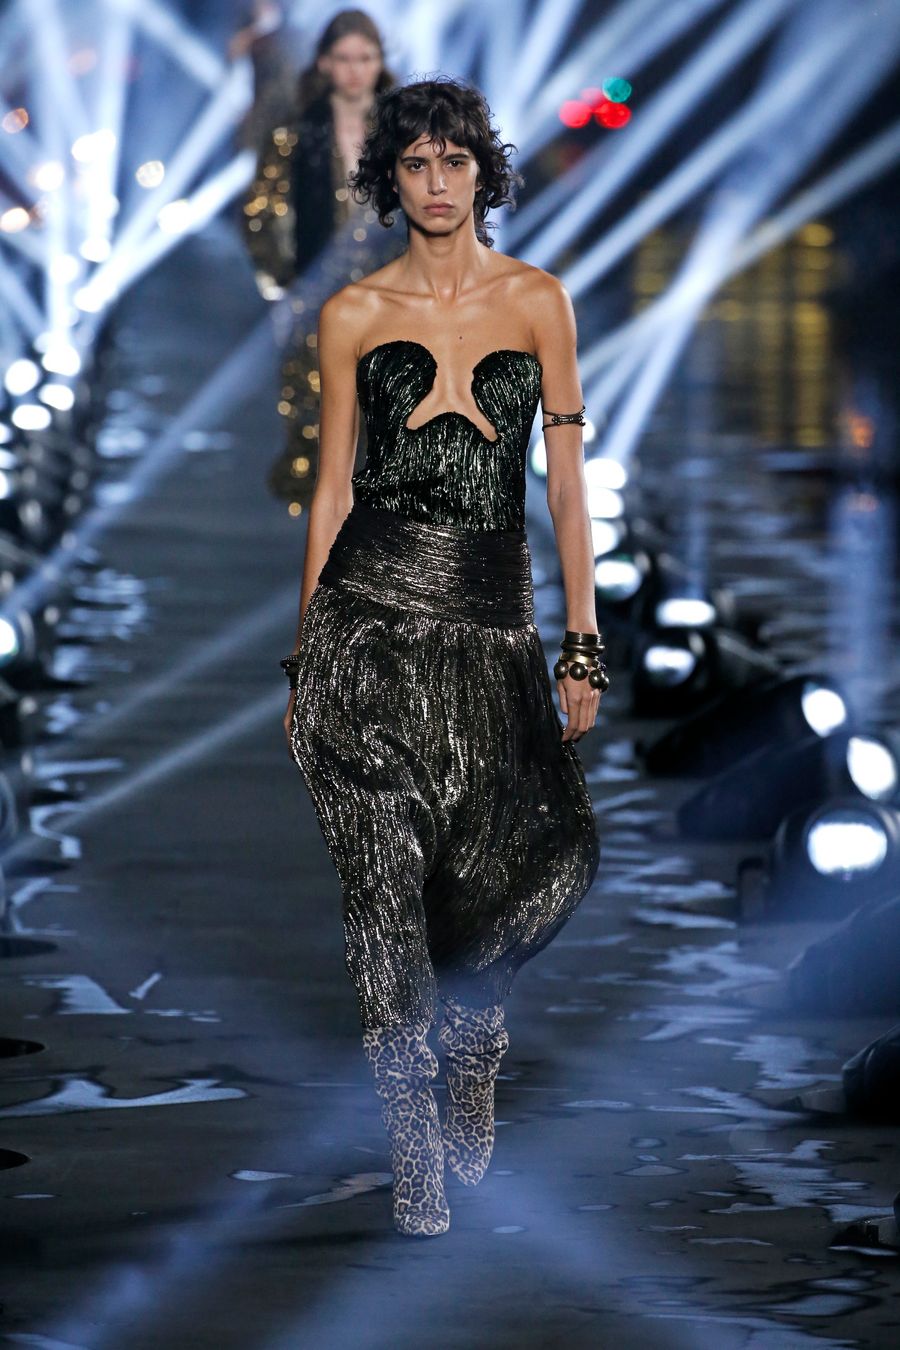 Latest fashion trends: Catwalk collections from Paris Fashion Week - Xinhua